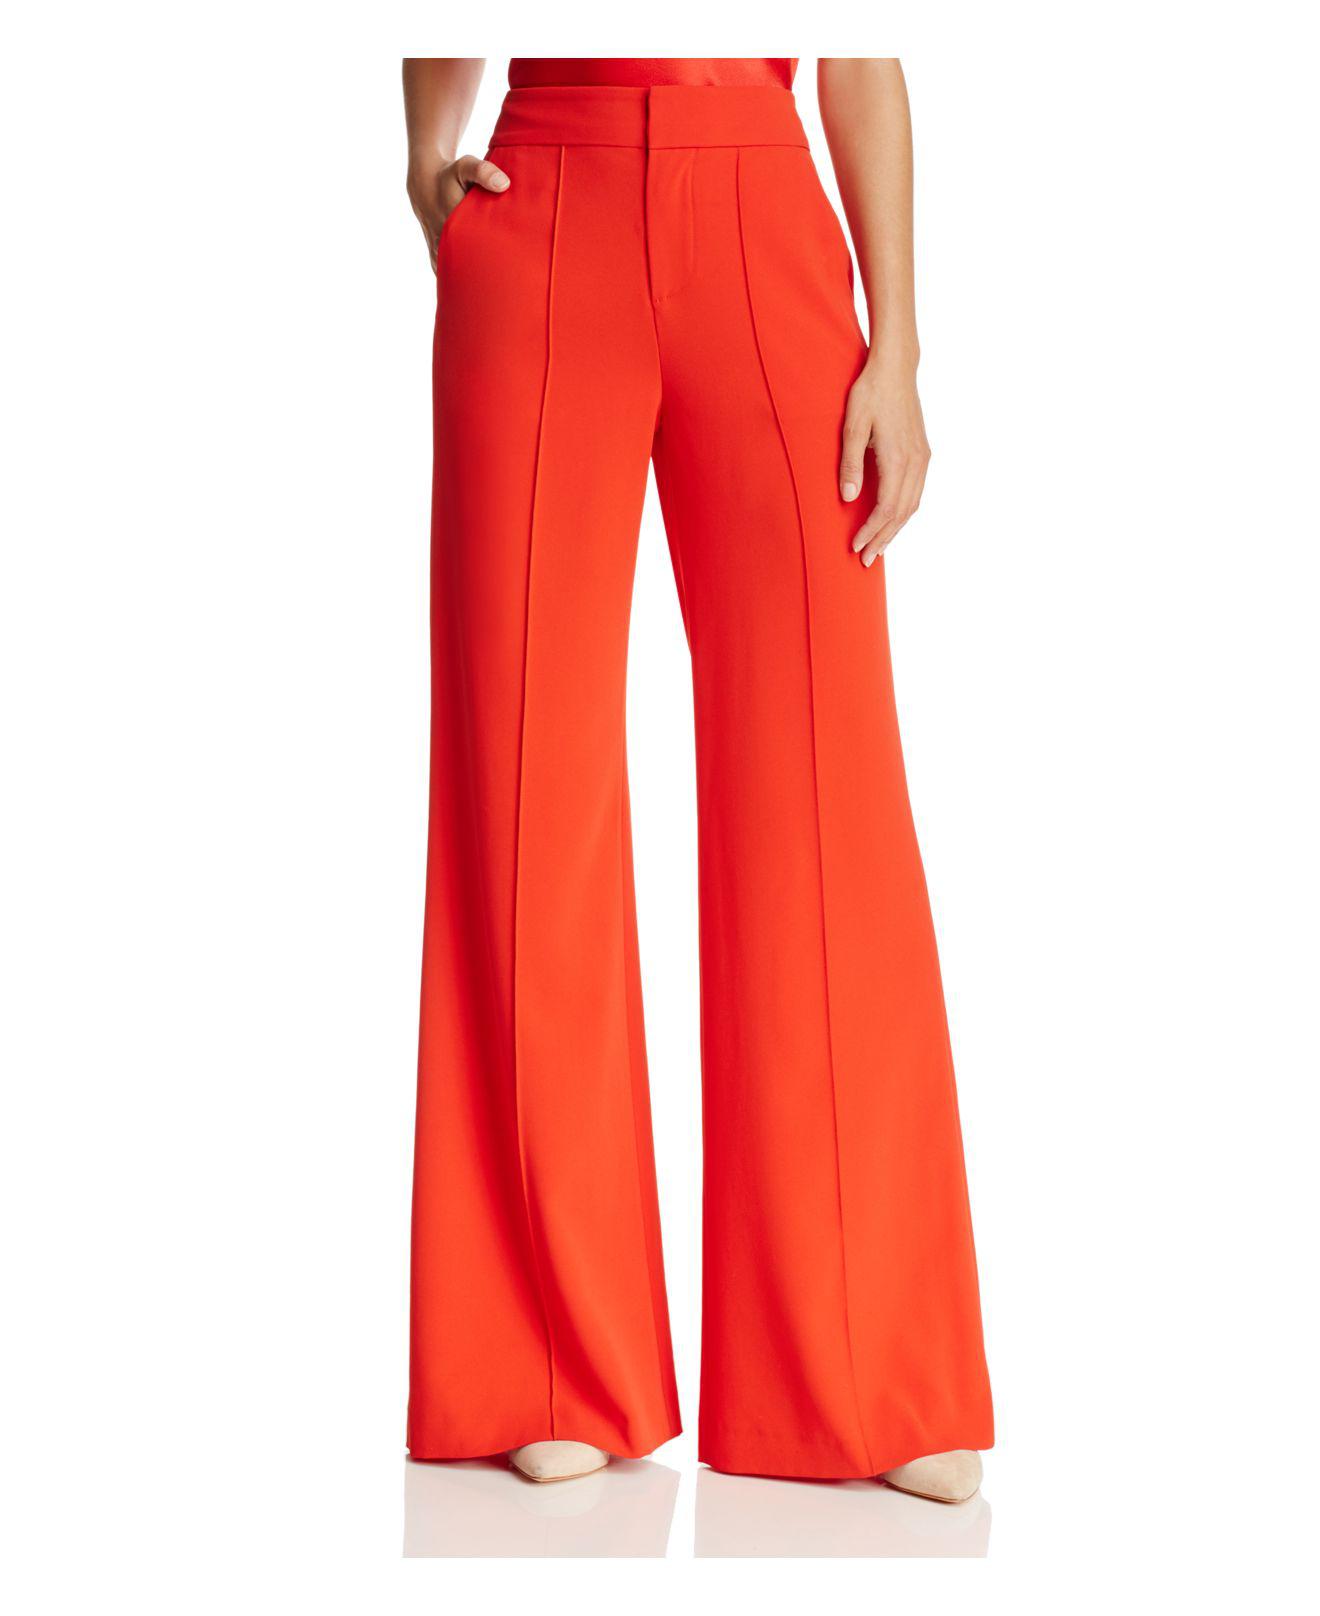 Alice + Olivia Dylan High-rise Wide Leg Pants in Red - Lyst